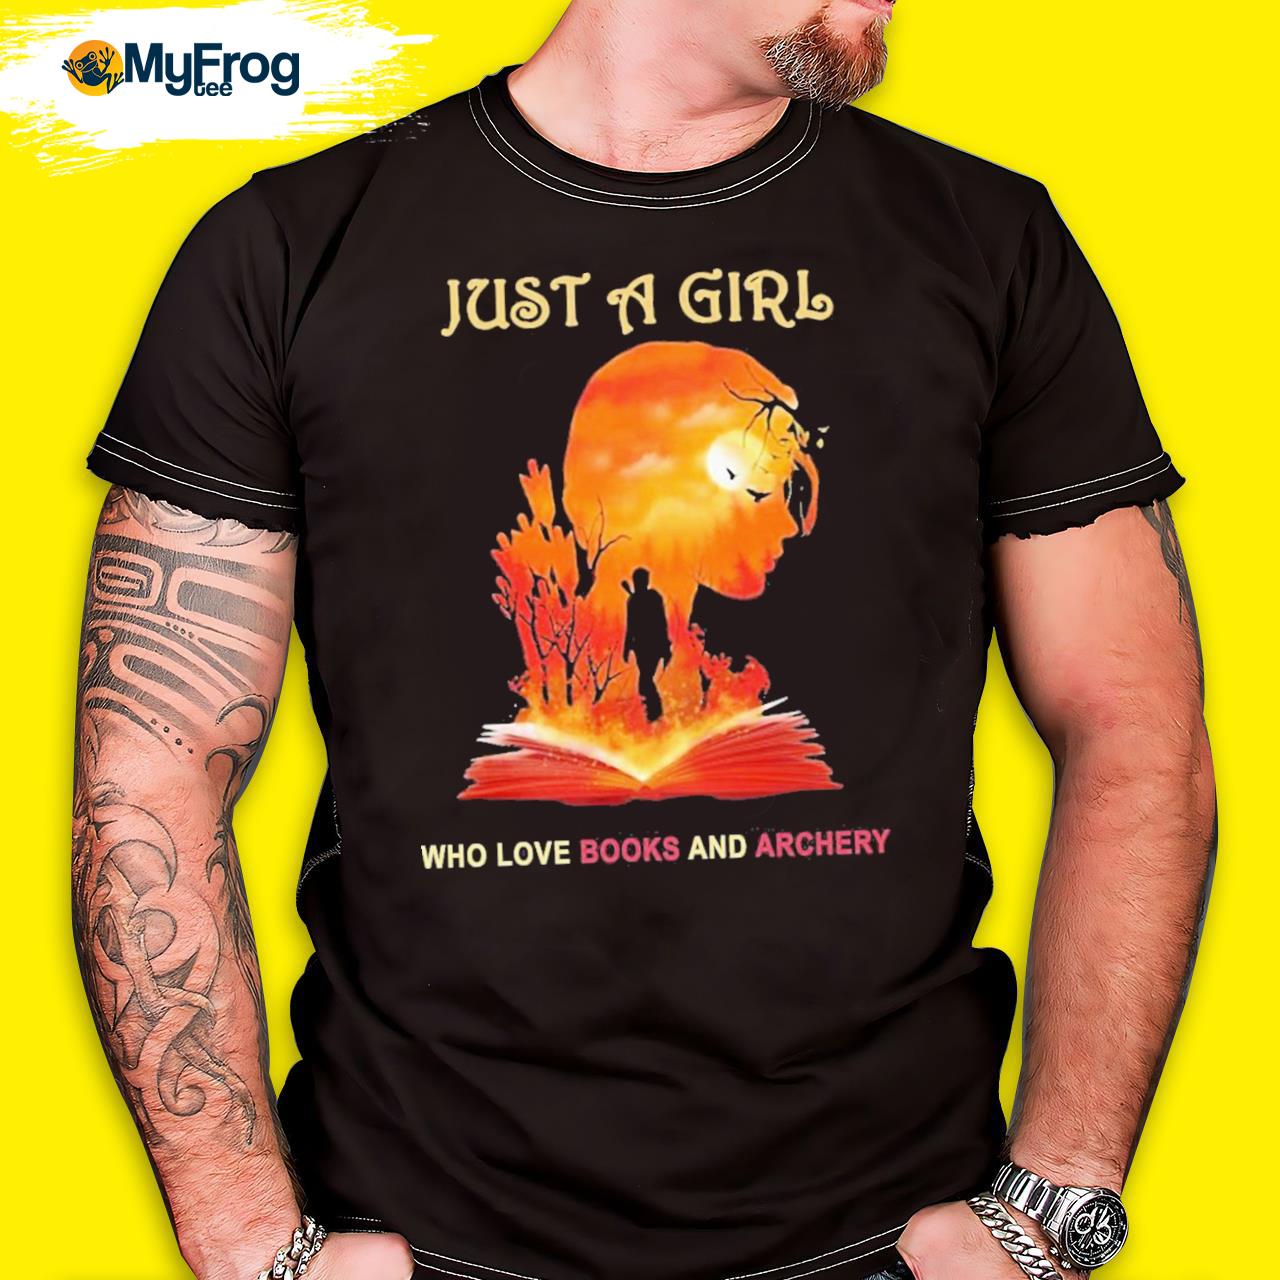 Just A Girl Who Love Books And Archery T-shirt